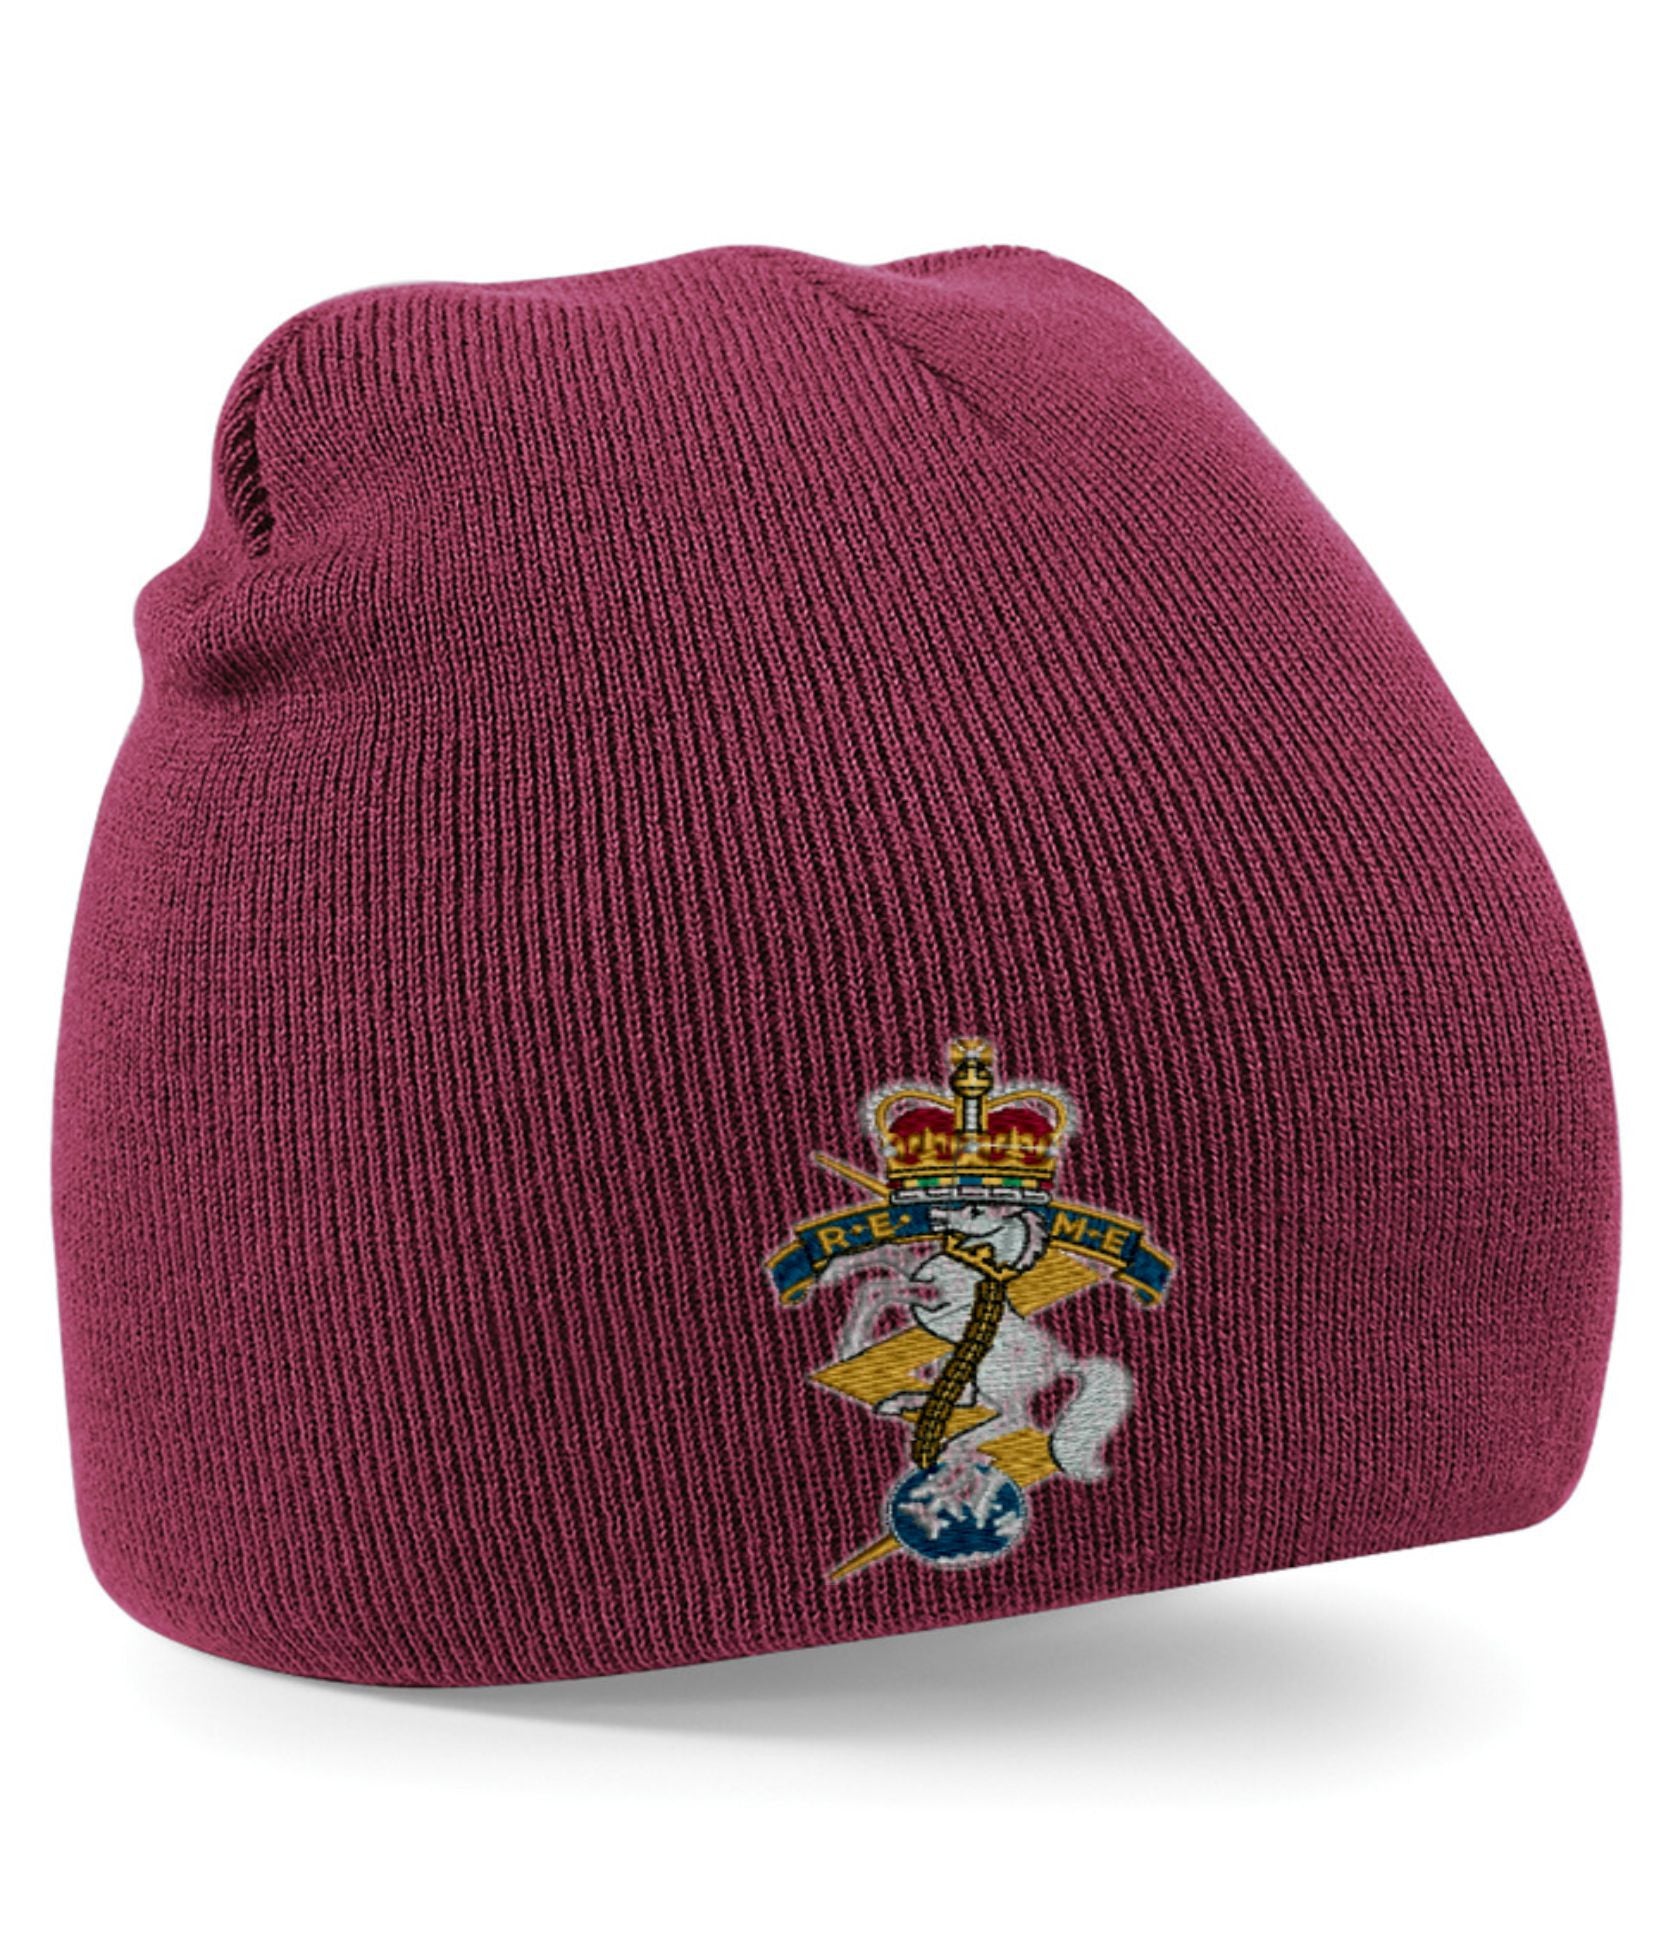 REME (Royal Electrical & Mechanical Engineers) Beanie Hat